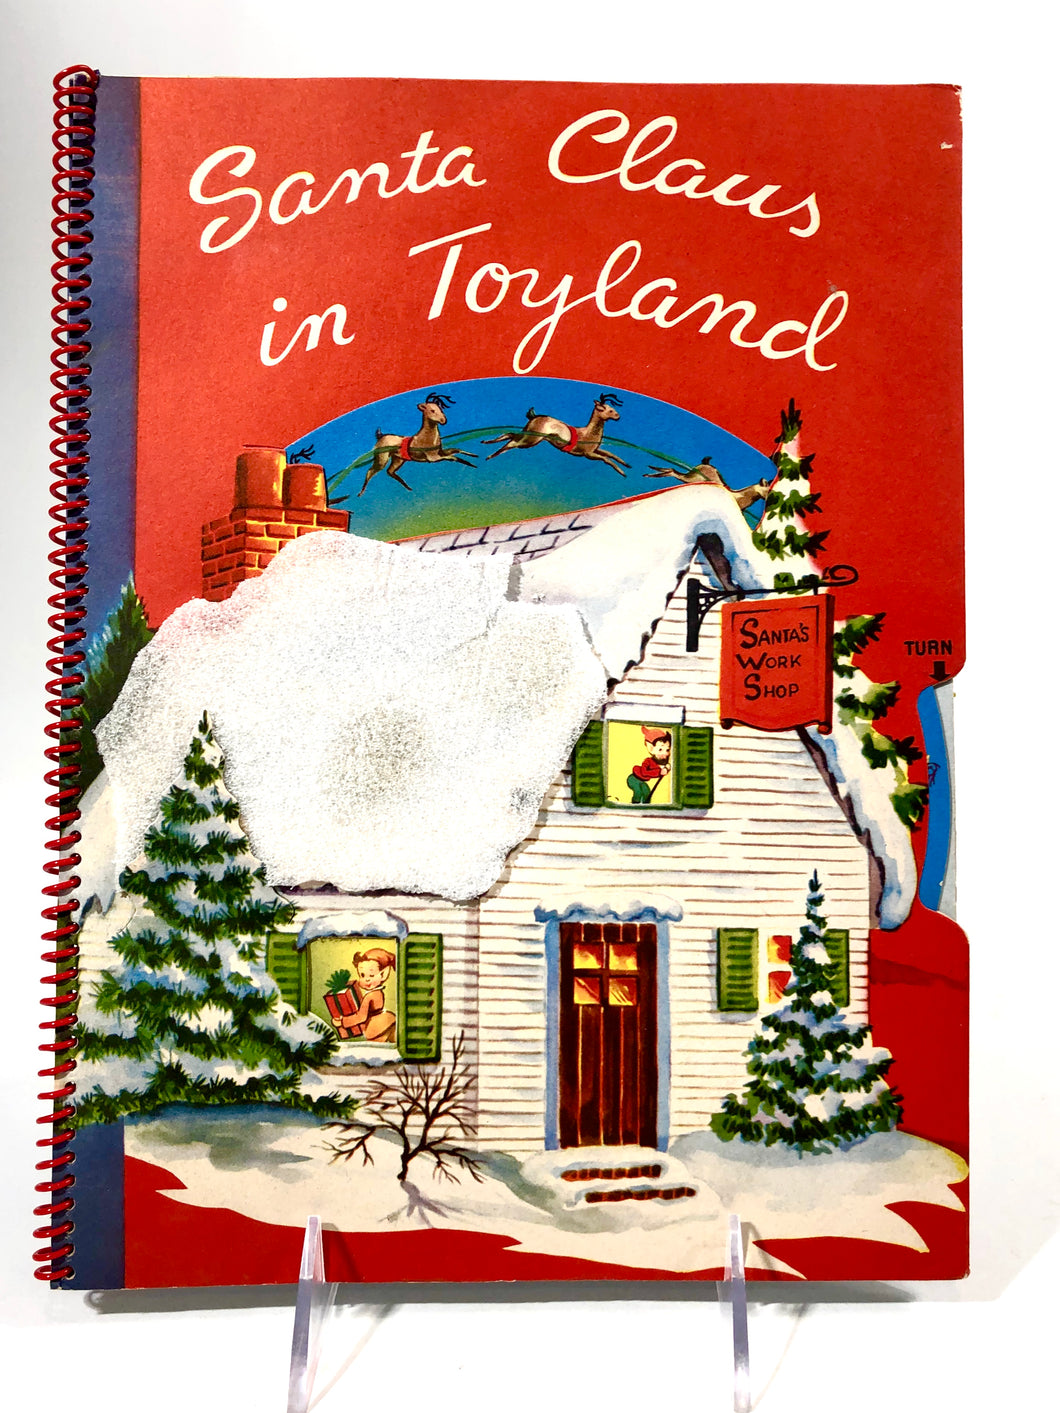 1951 SANTA CLAUS IN TOYLAND Mechanical Children's Holiday Book